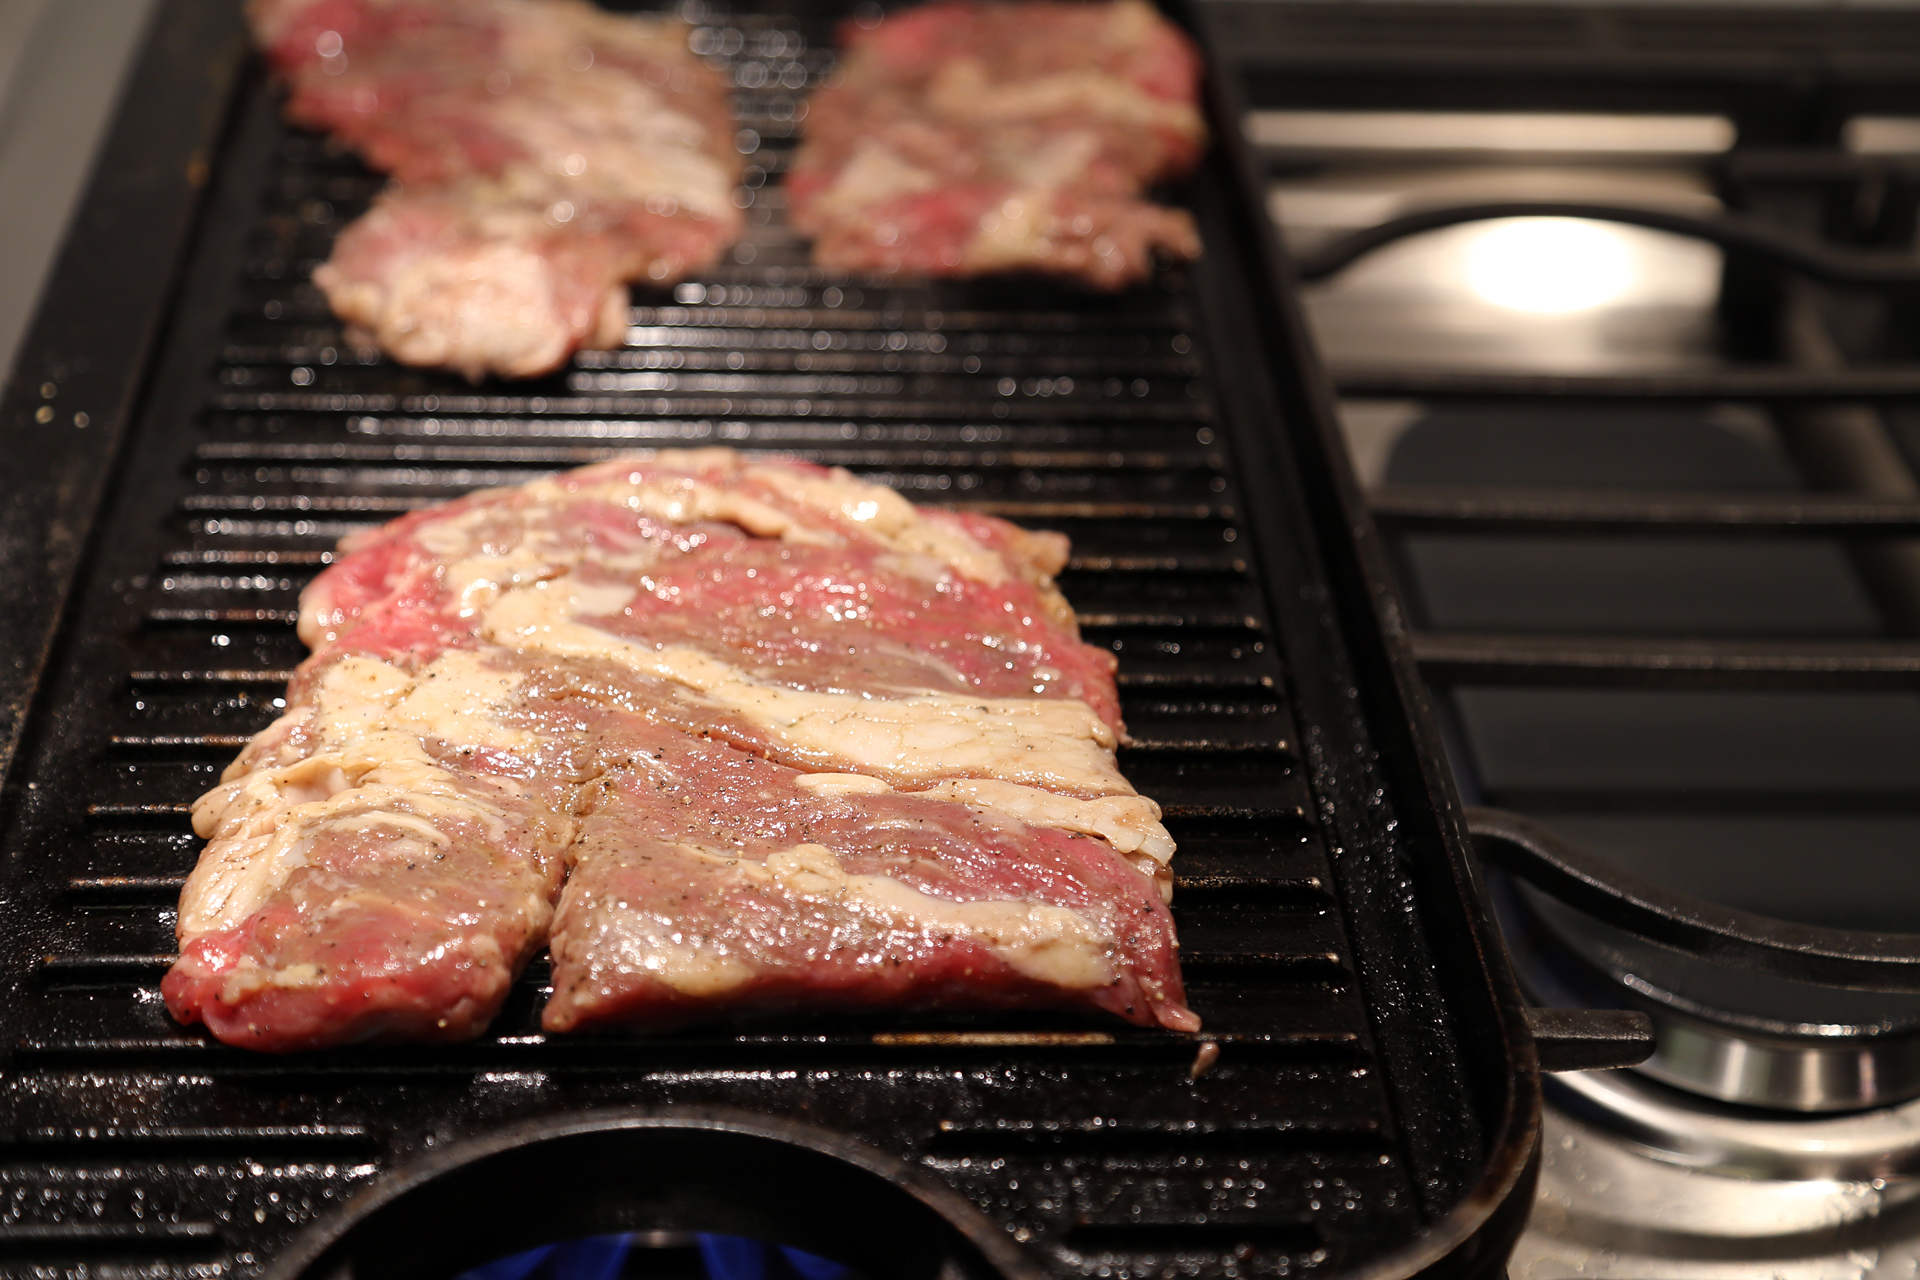 To make the steak, season it liberally with salt and pepper and drizzle it with olive oil. Prepare a gas or charcoal grill for medium-high direct heat or heat a stovetop grill on the stovetop.